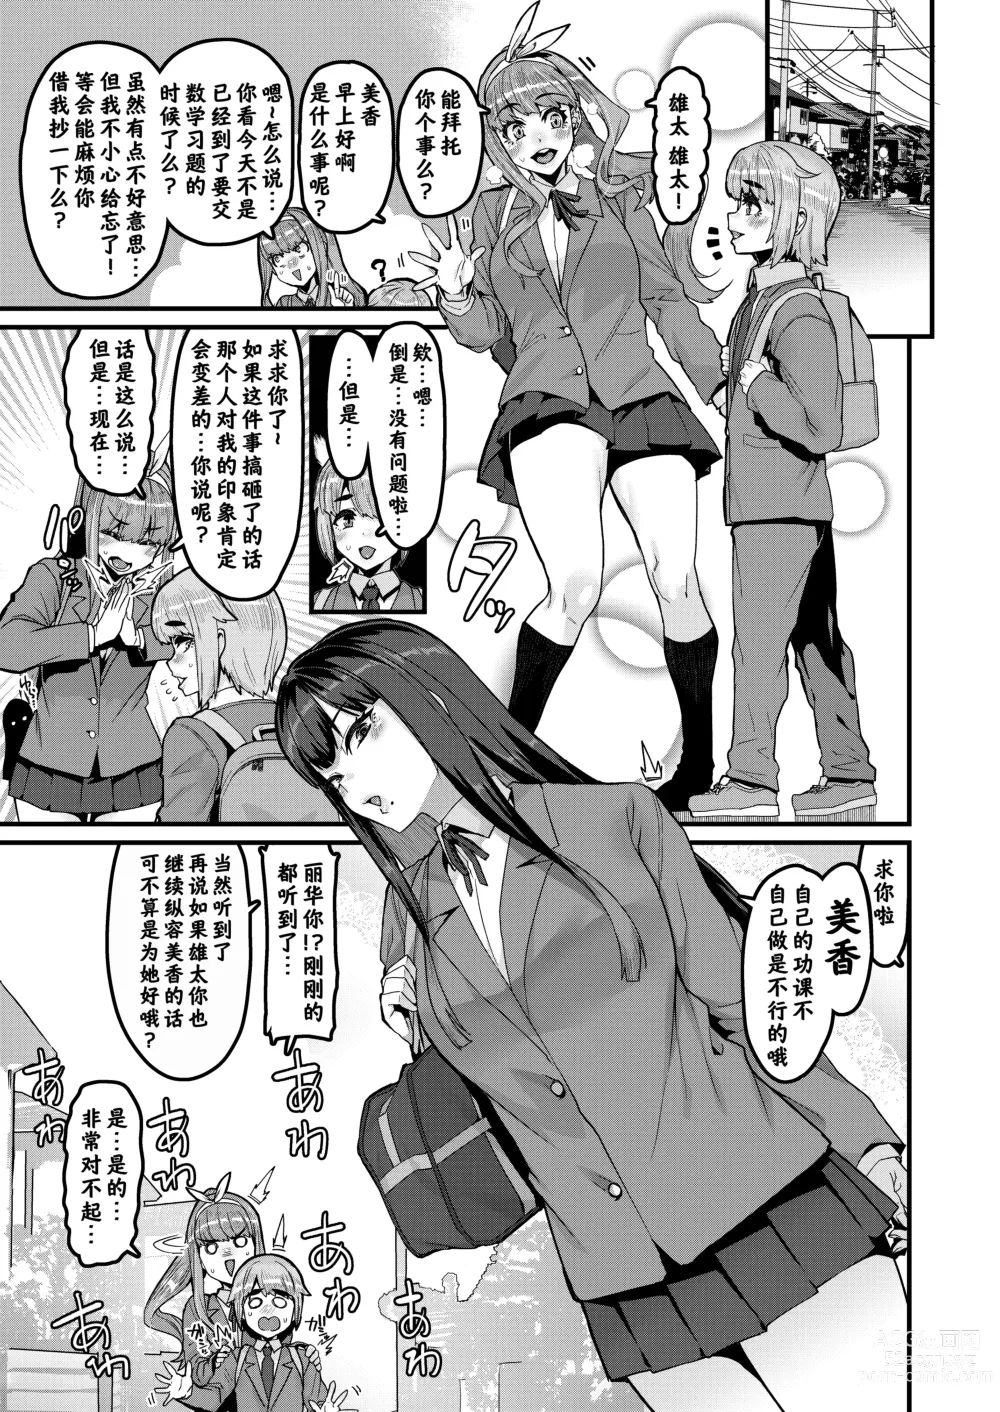 Page 2 of doujinshi 青梅竹马到此为止